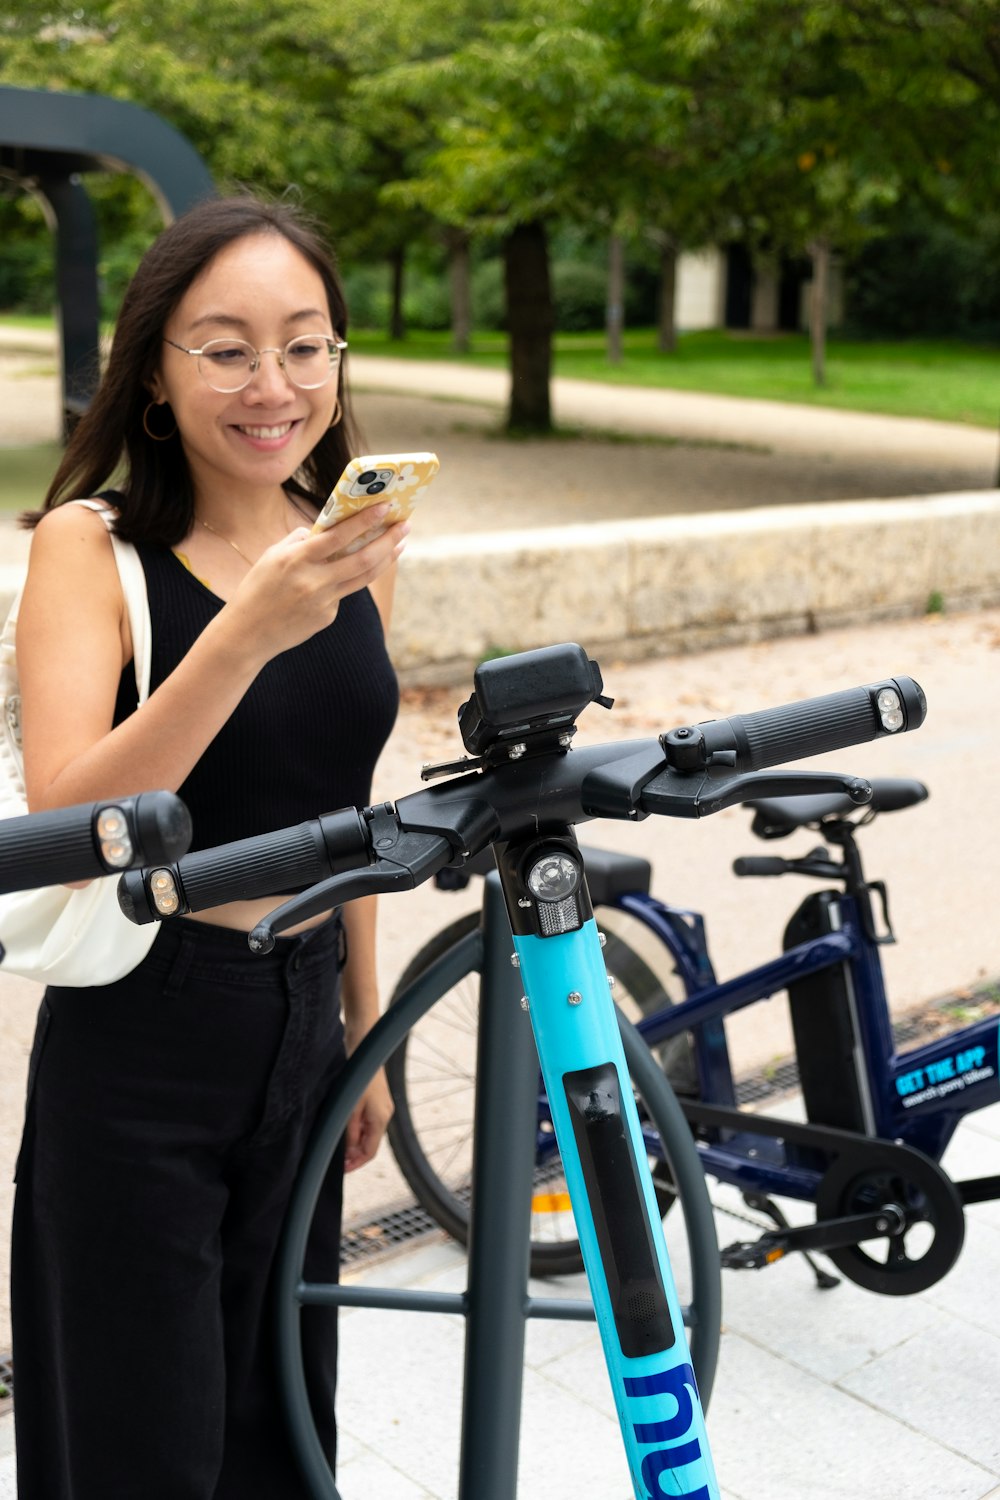 a woman standing next to a bike holding a cell phone